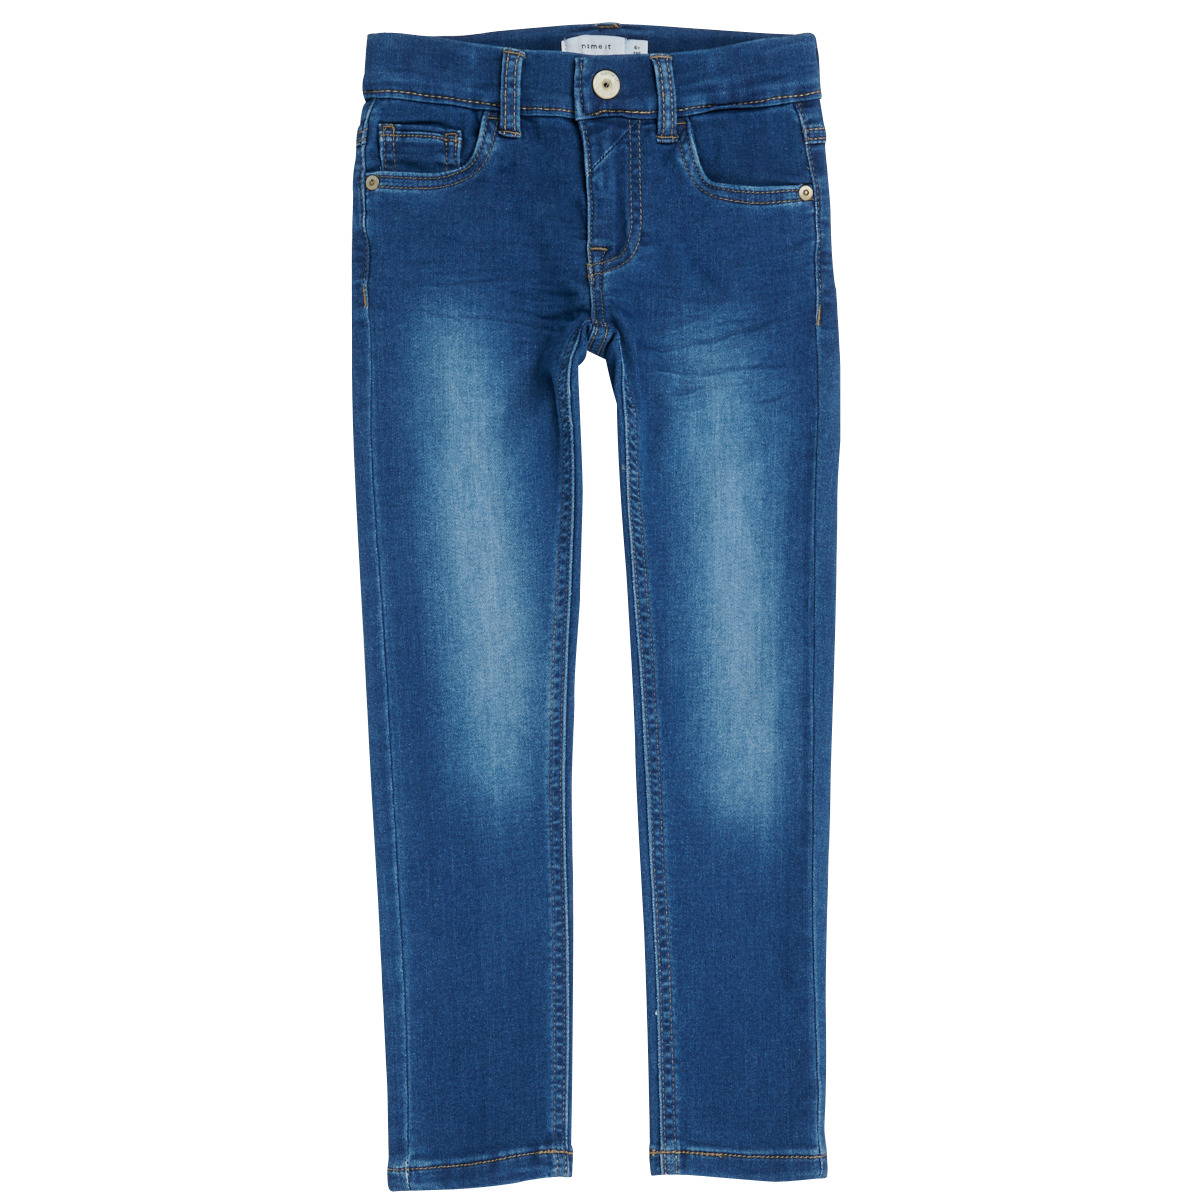 Name it NKMTHEO Blue - jeans - Clothing delivery | Child Spartoo slim NET ! Free